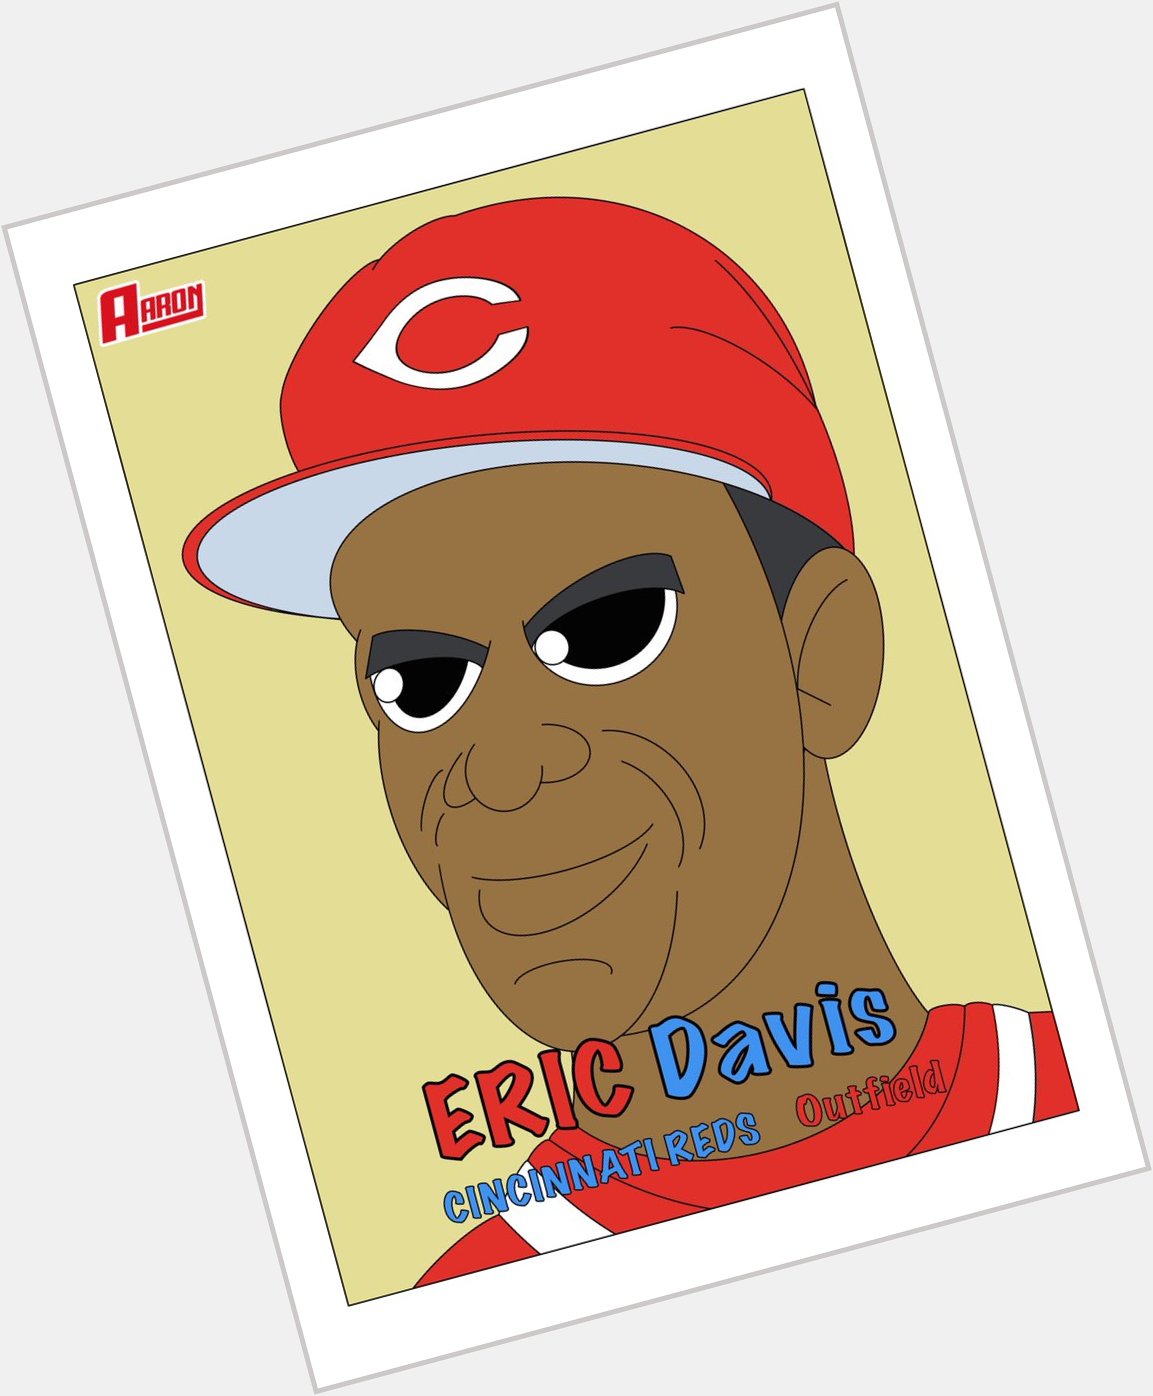 Happy birthday Eric Davis. One of my all-time favorites. 